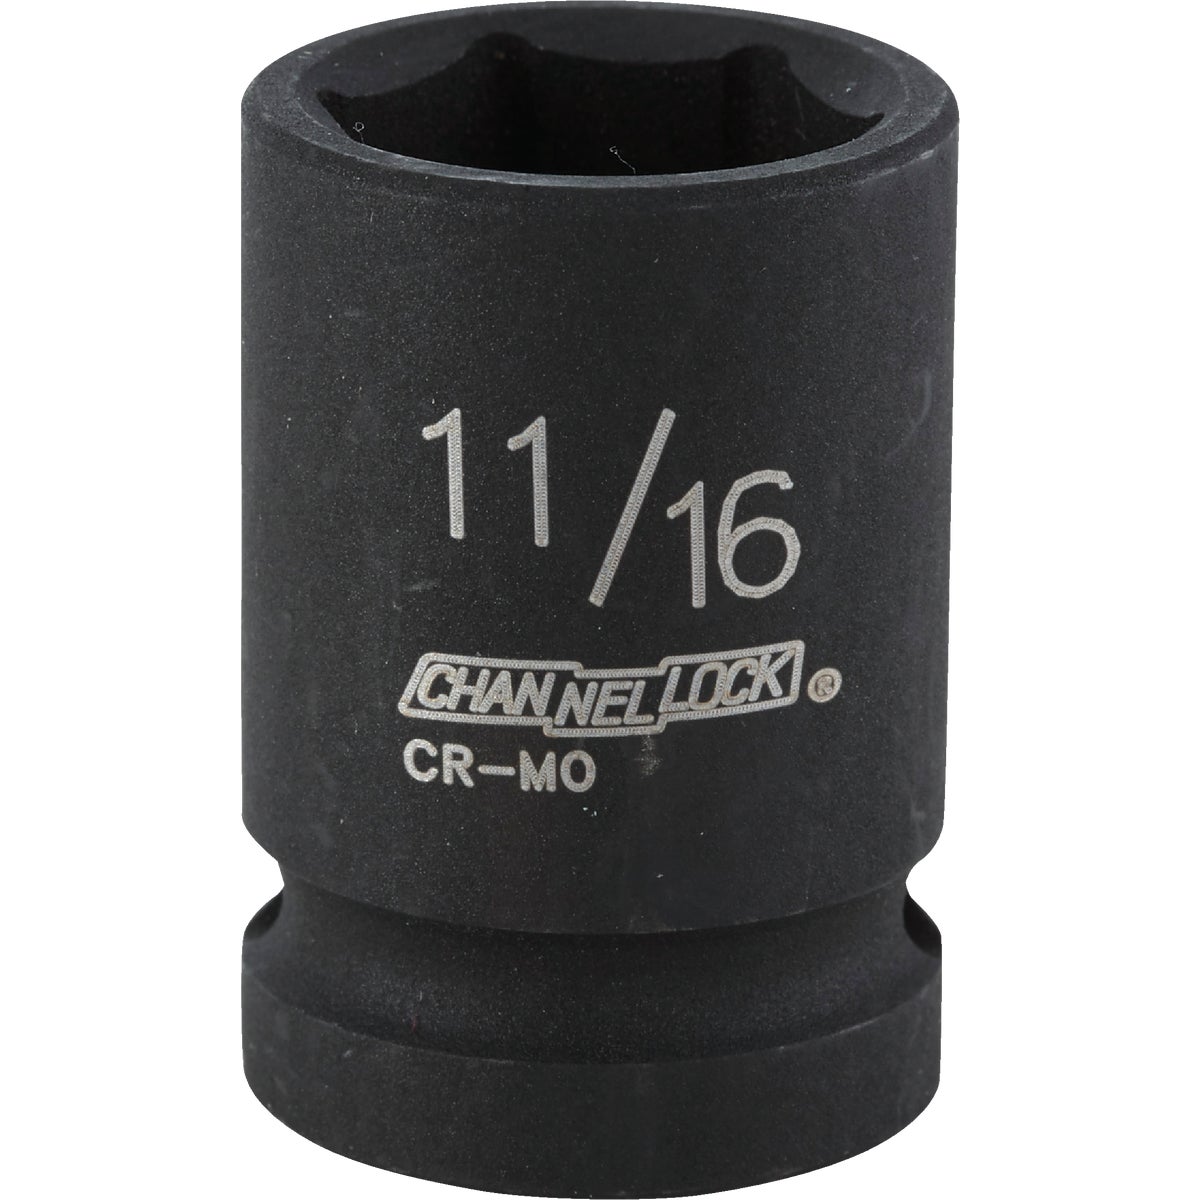 Channellock 1/2 In. Drive 11/16 In. 6-Point Shallow Standard Impact Socket